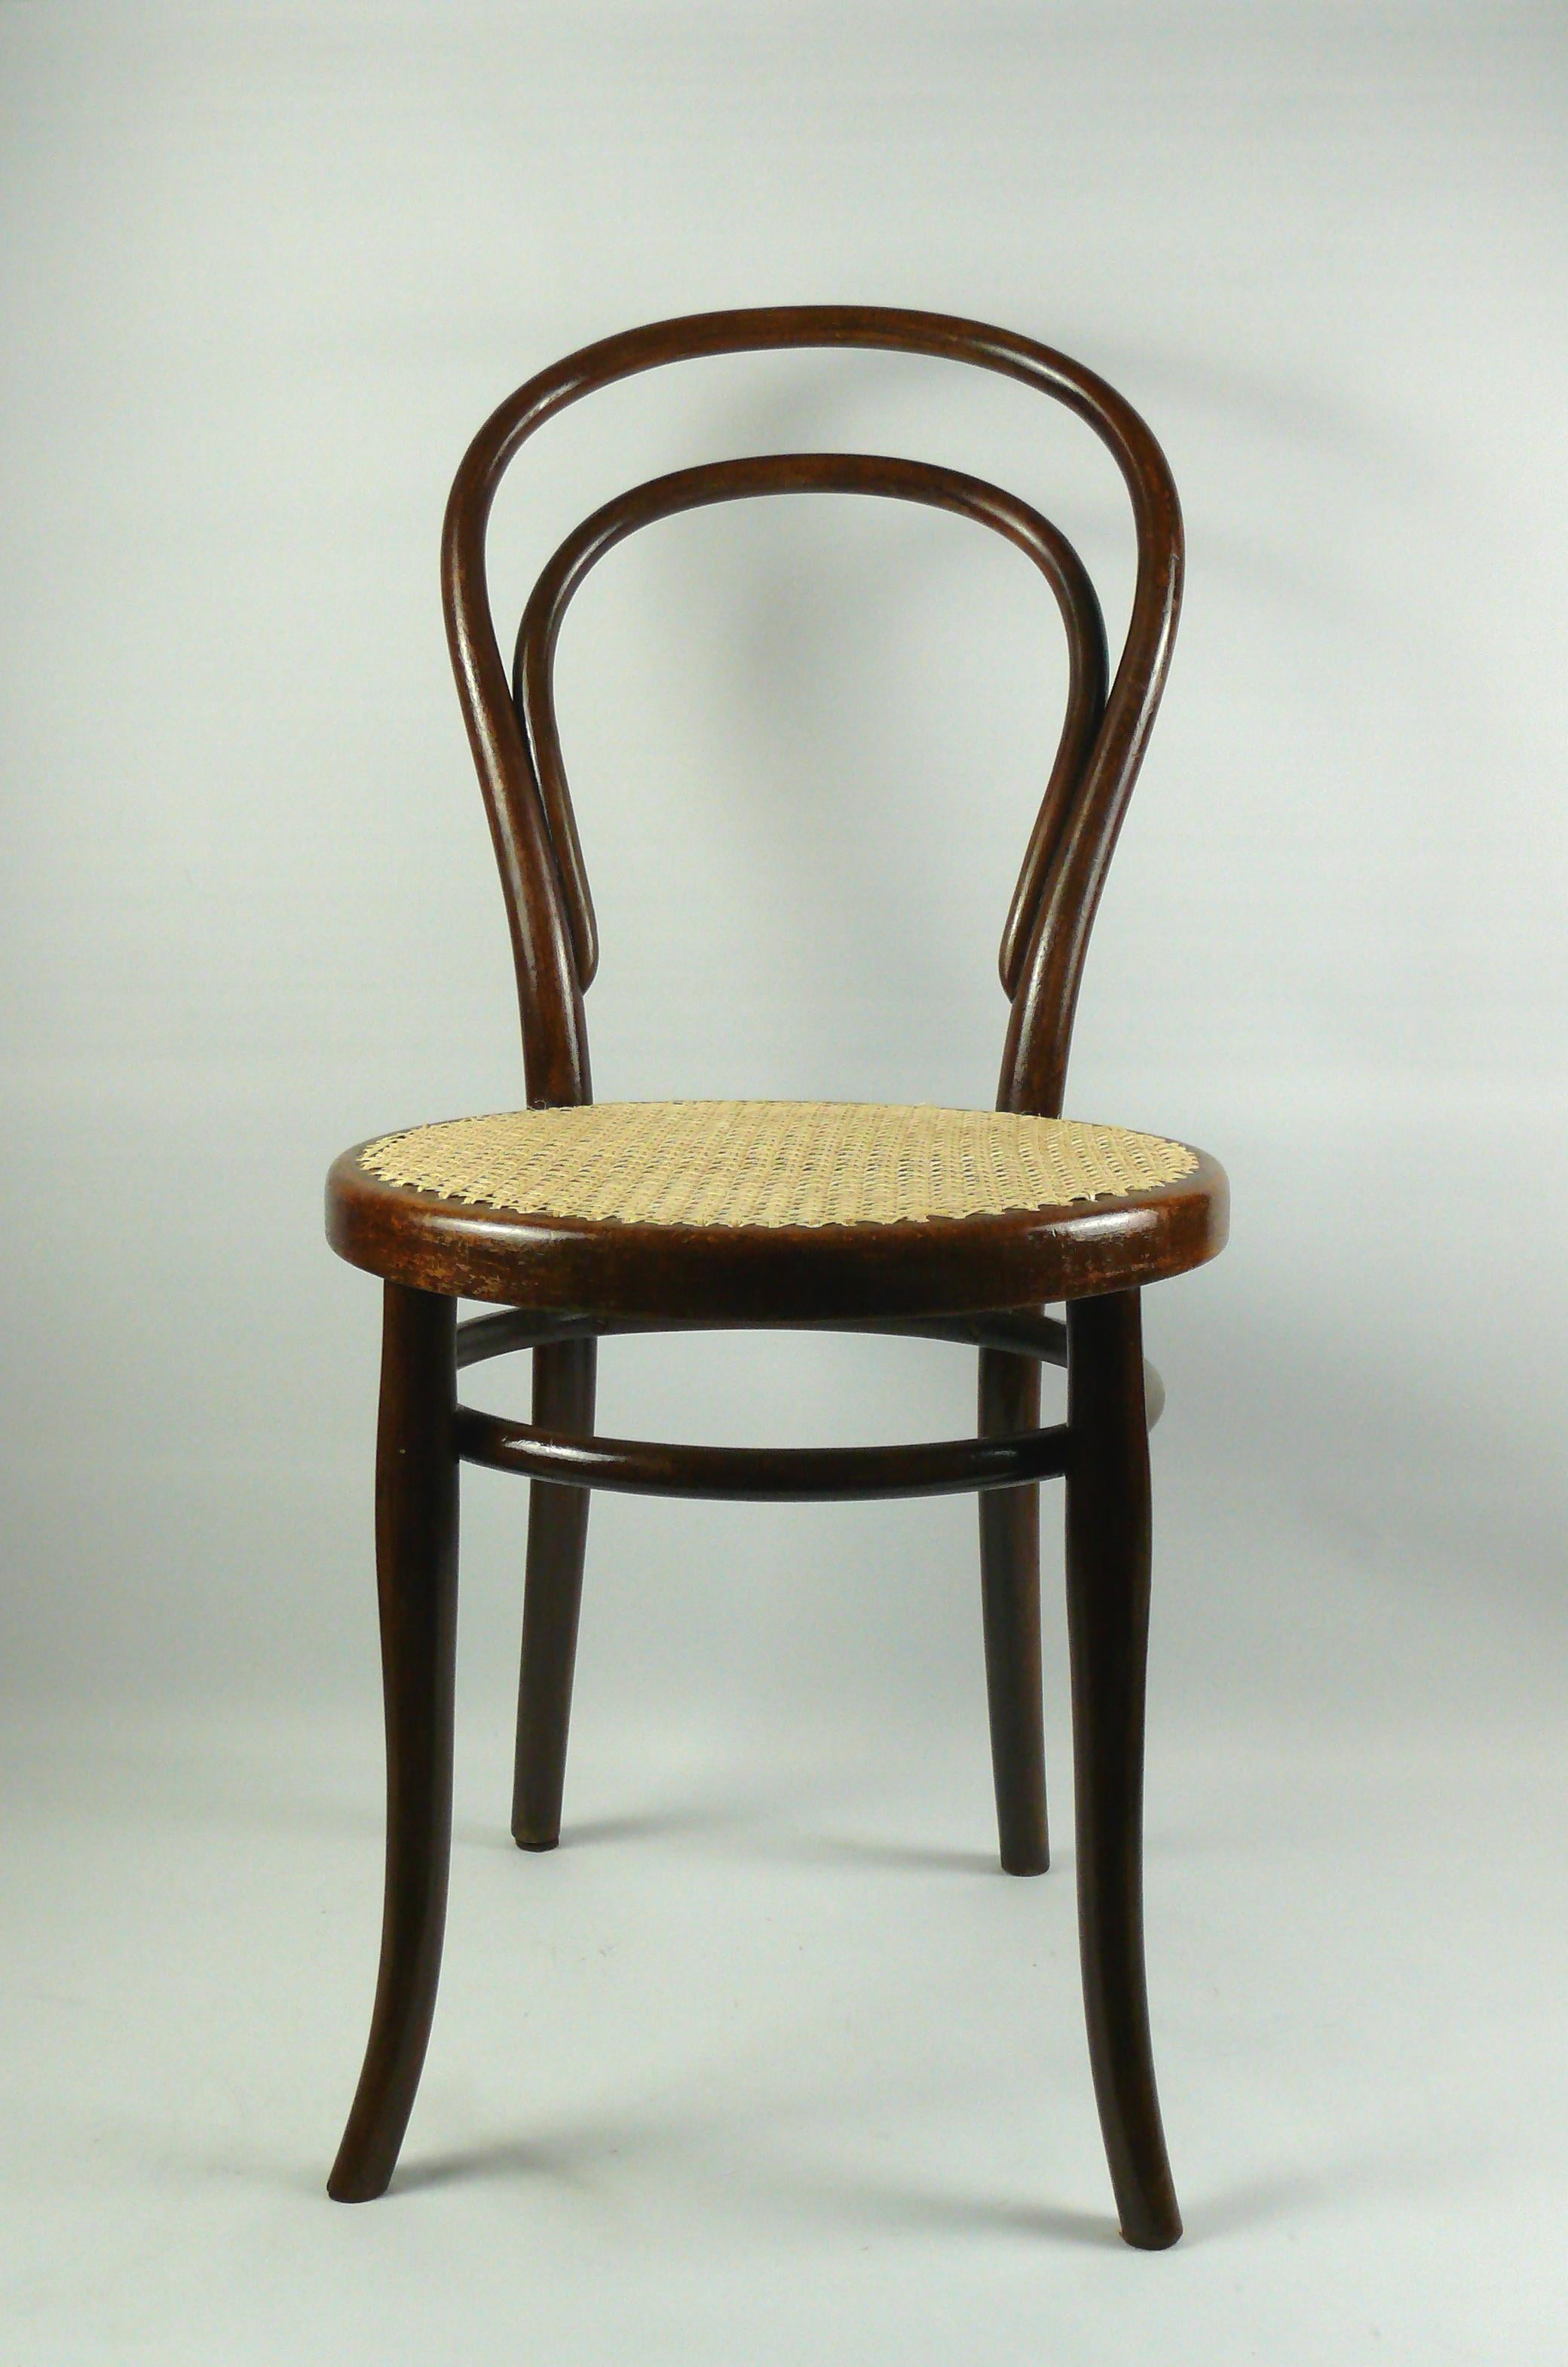 Collector's items: original bentwood chair from the Thonet company - Vienna, model no. 14 - designed by Michael Thonet. These chairs were the company's best seller for decades and were often copied. This chair comes from Vienna after 1881. The